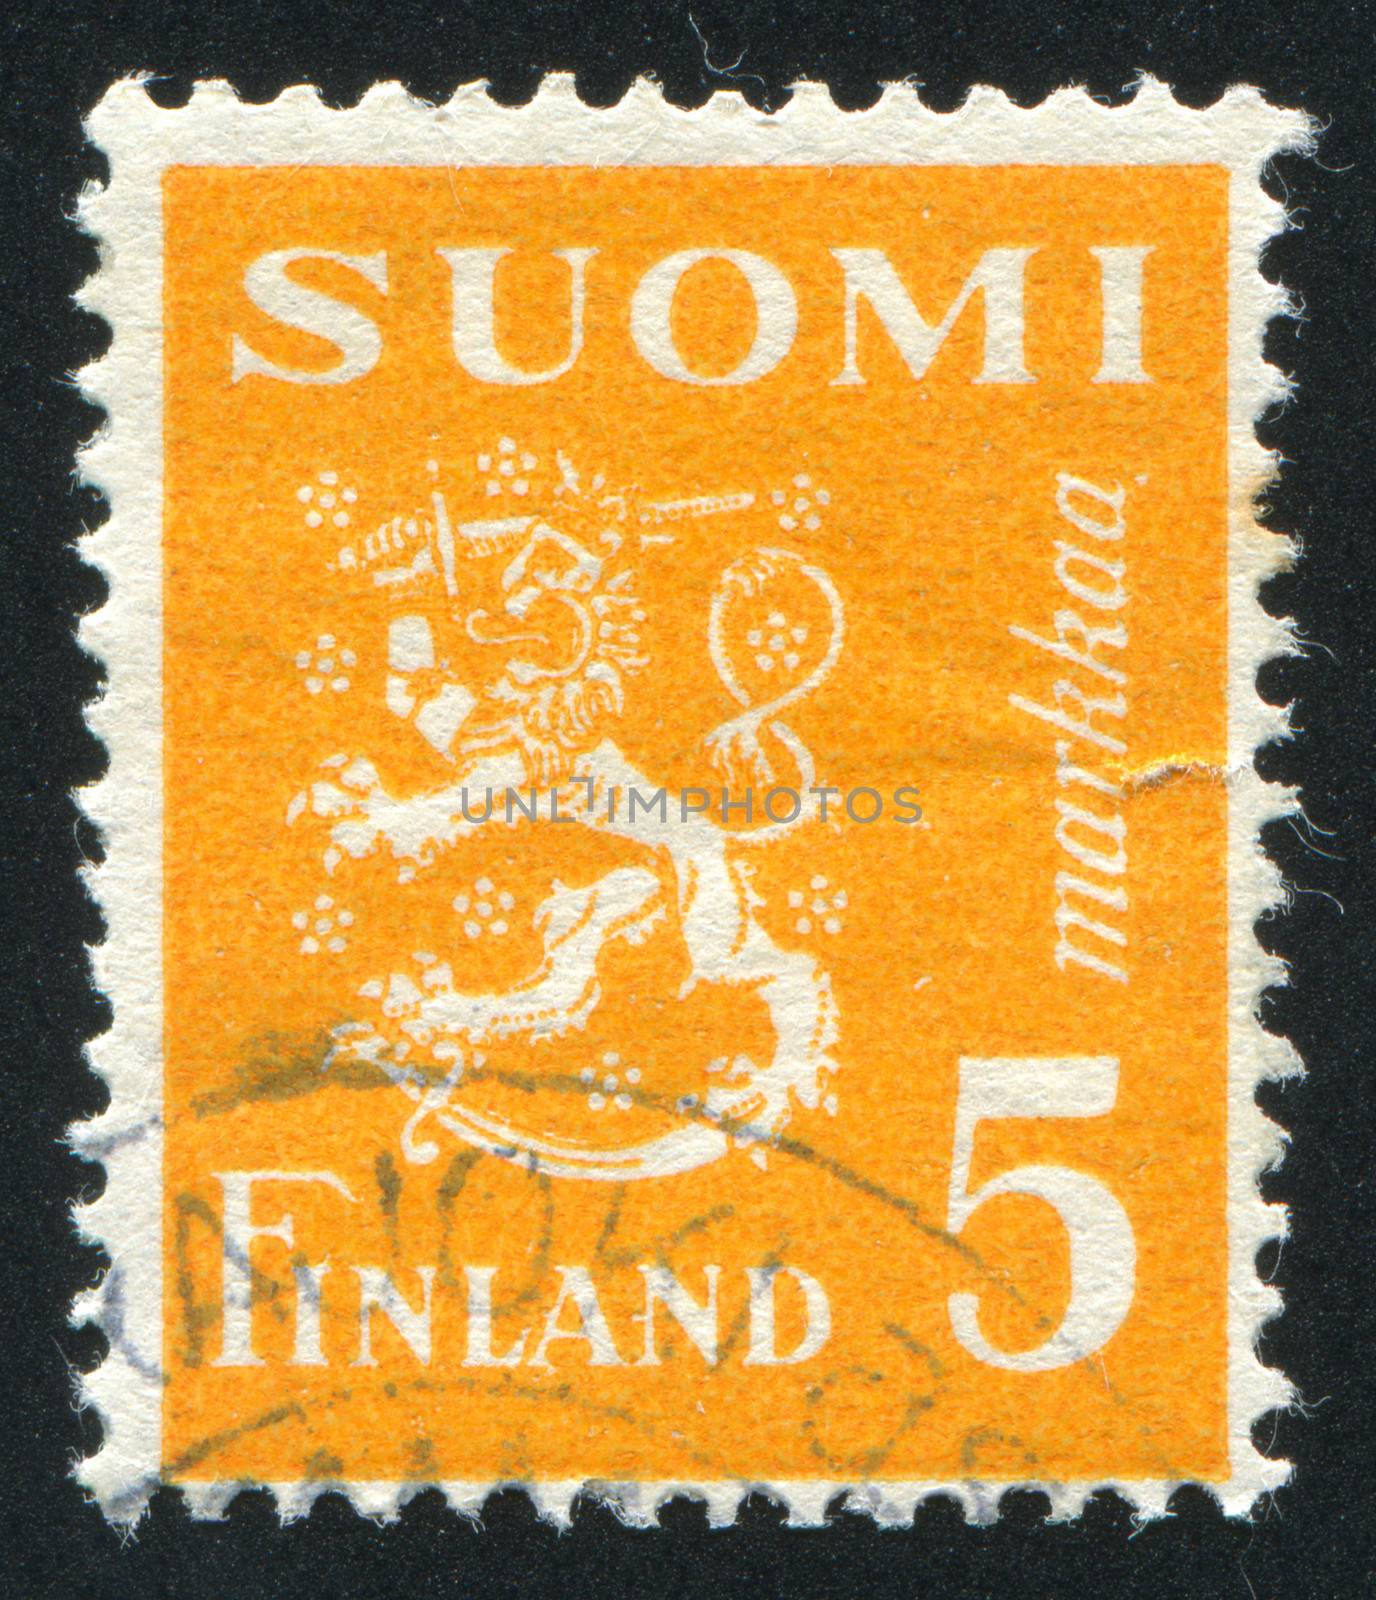 FINLAND - CIRCA 1930: stamp printed by Finland, shows Coat of arms of Finland, circa 1930